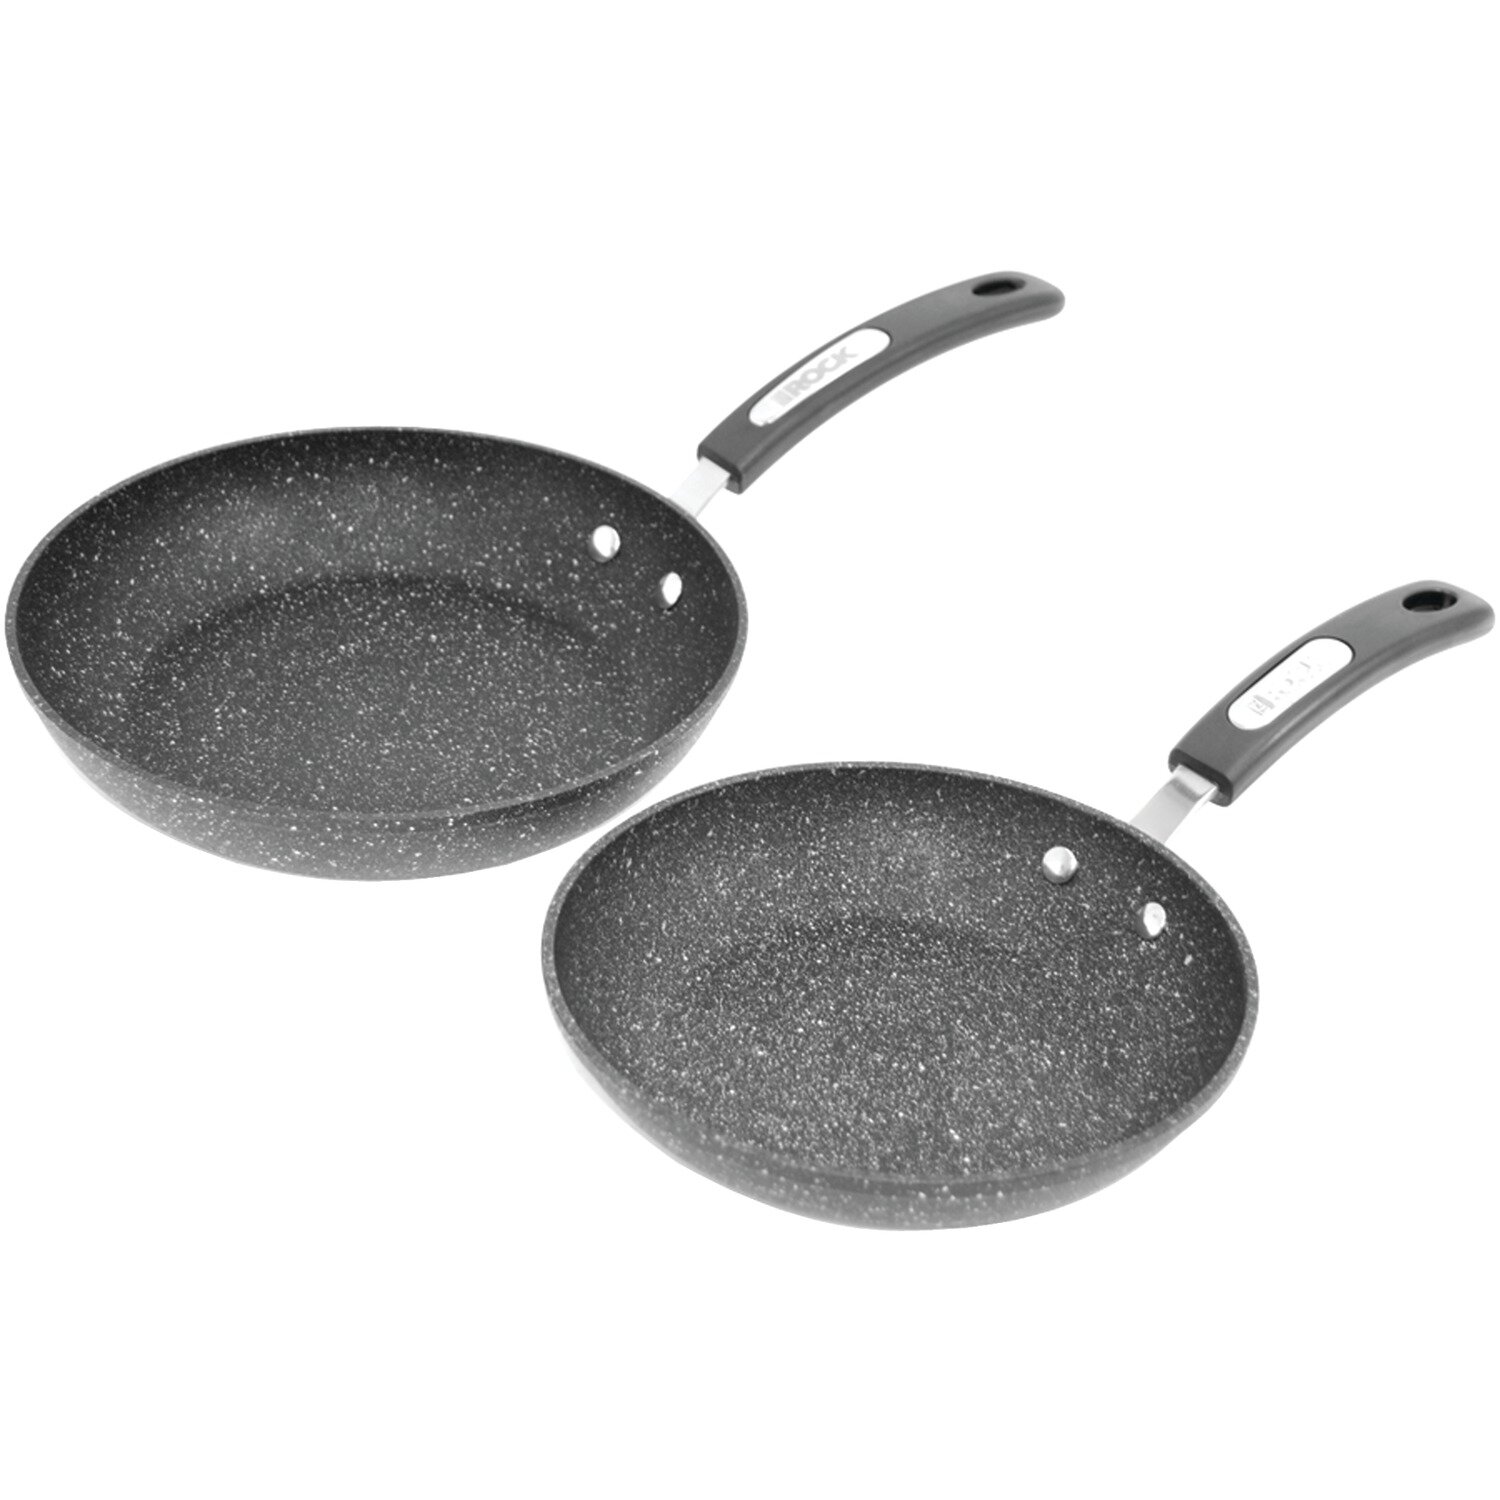 starfrit the rock frying pan review